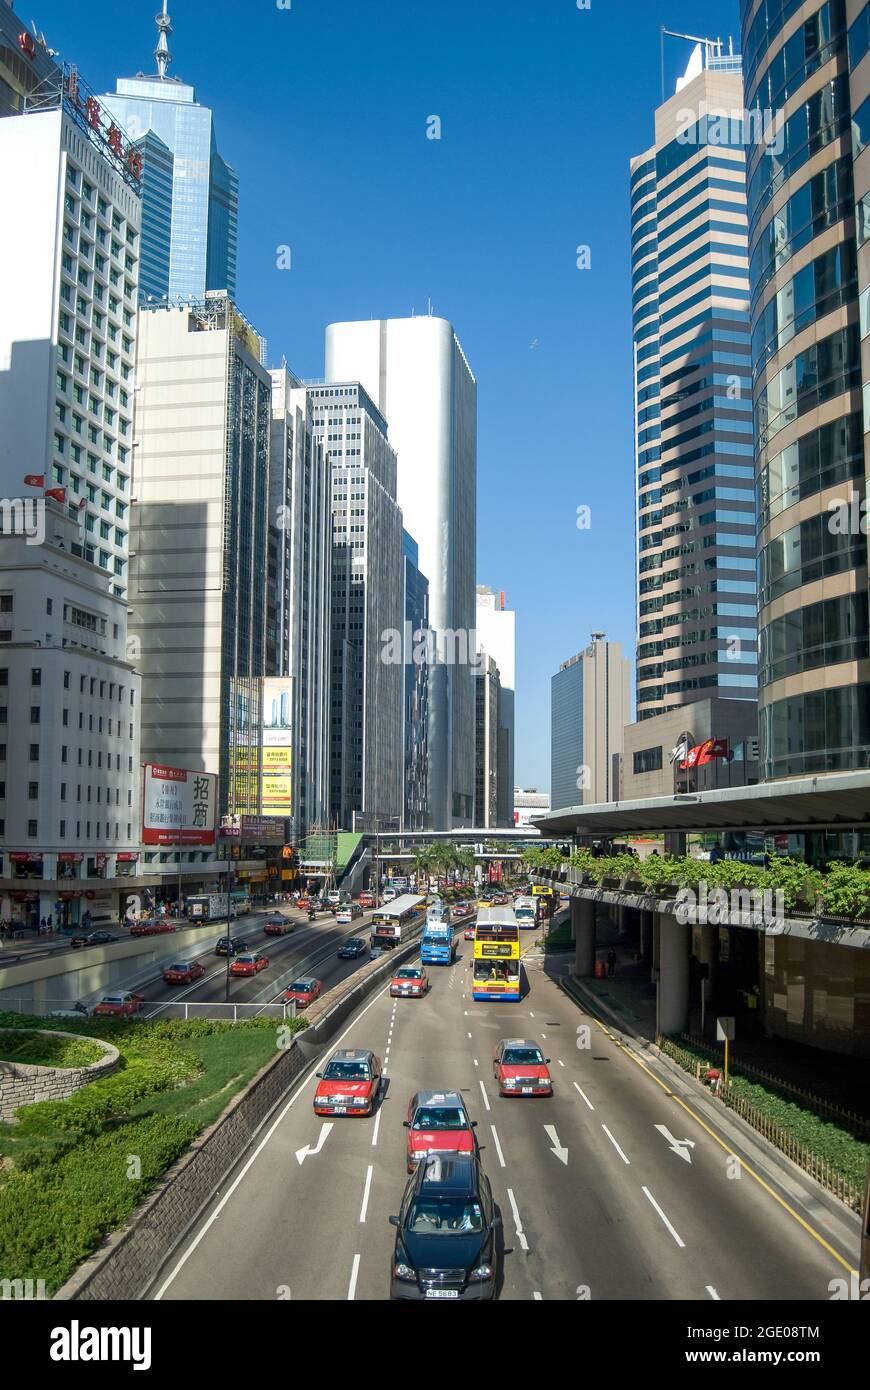 Traffic and high-rise buildings, Connaught Road Central, Sheung Wan, Victoria Harbour, Hong Kong Island, Hong Kong, People's Republic of China Stock Photo